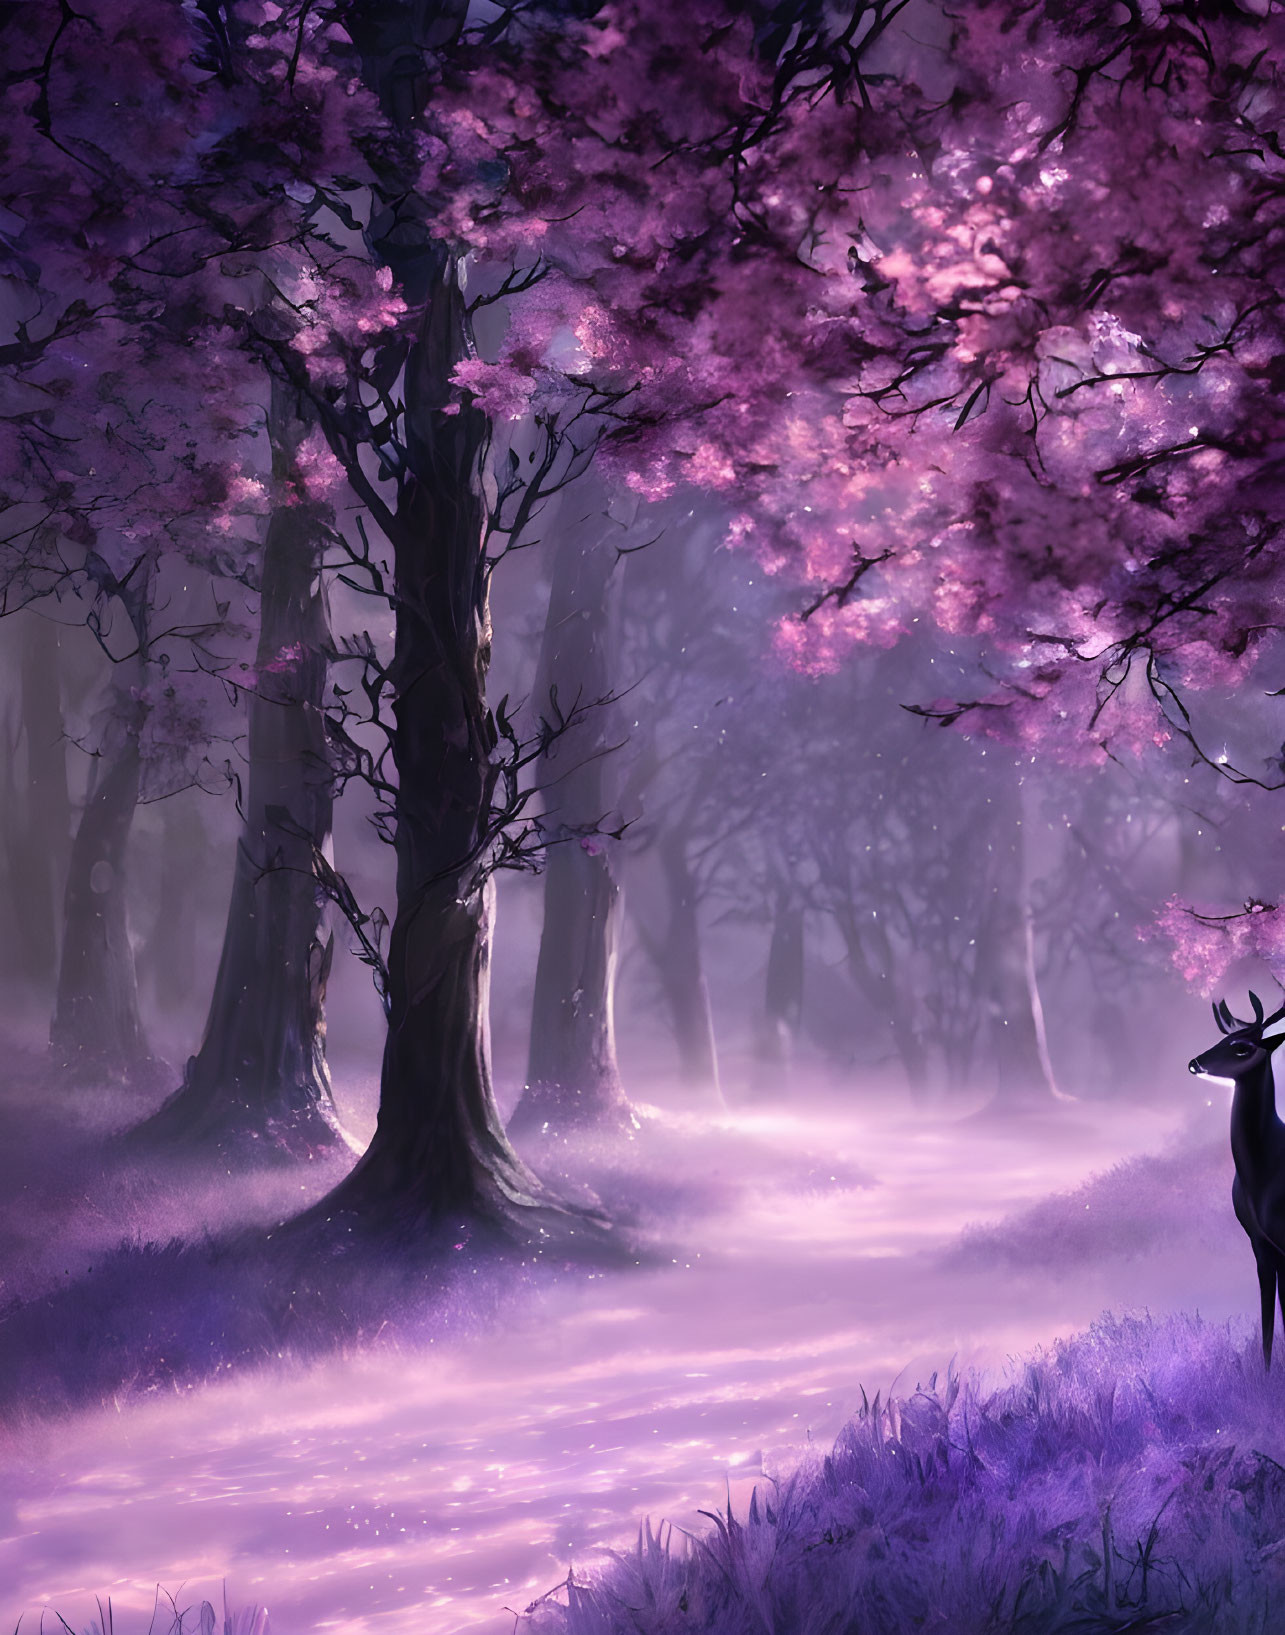 Enchanting forest scene with purple hues, sparkling ground, and elegant deer amid pink cherry blossoms